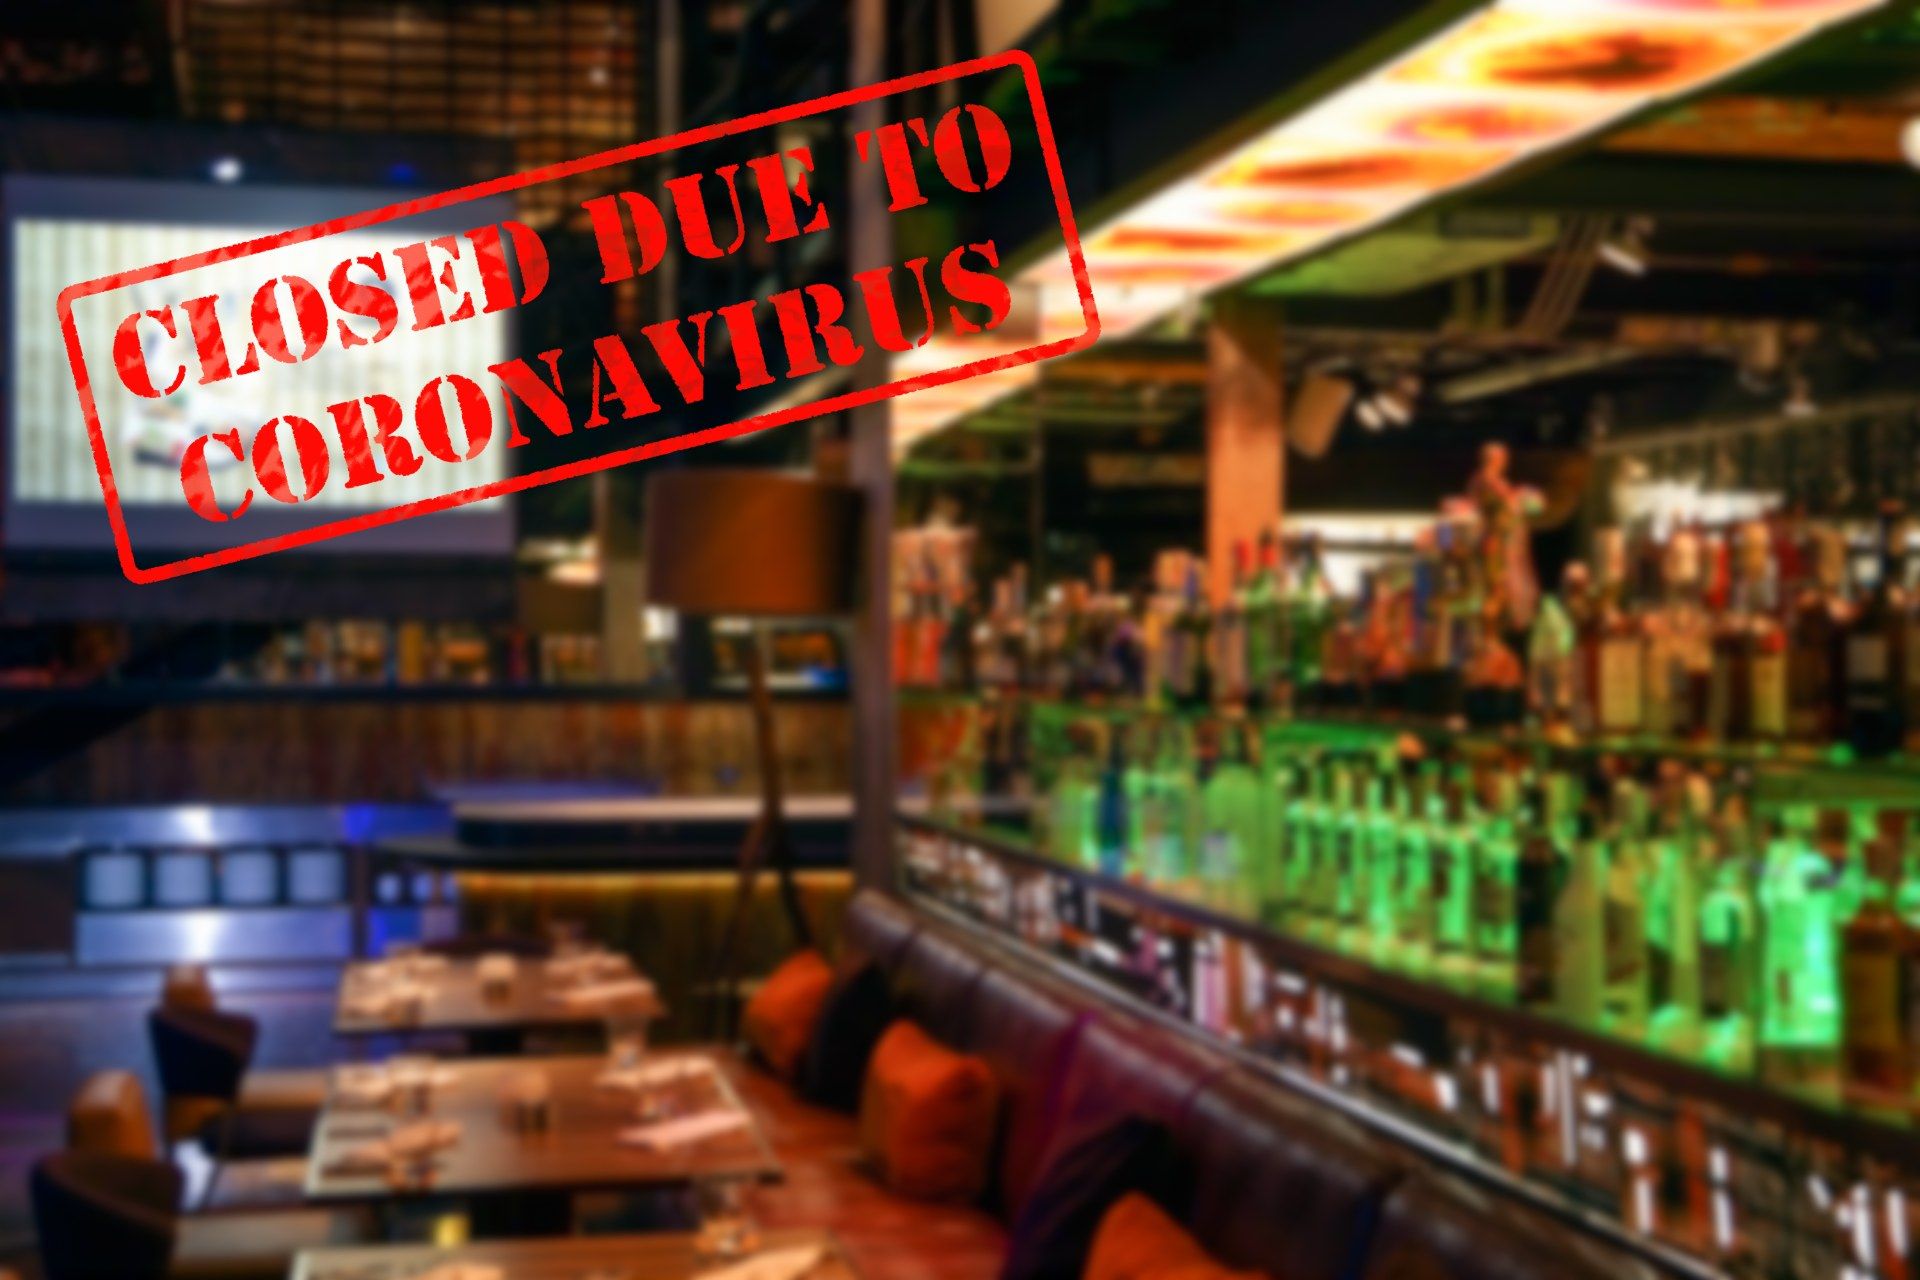 Blurred image of restaurant with red stamp overlaid in top left corner reading "CLosed Due To Coronavirus"